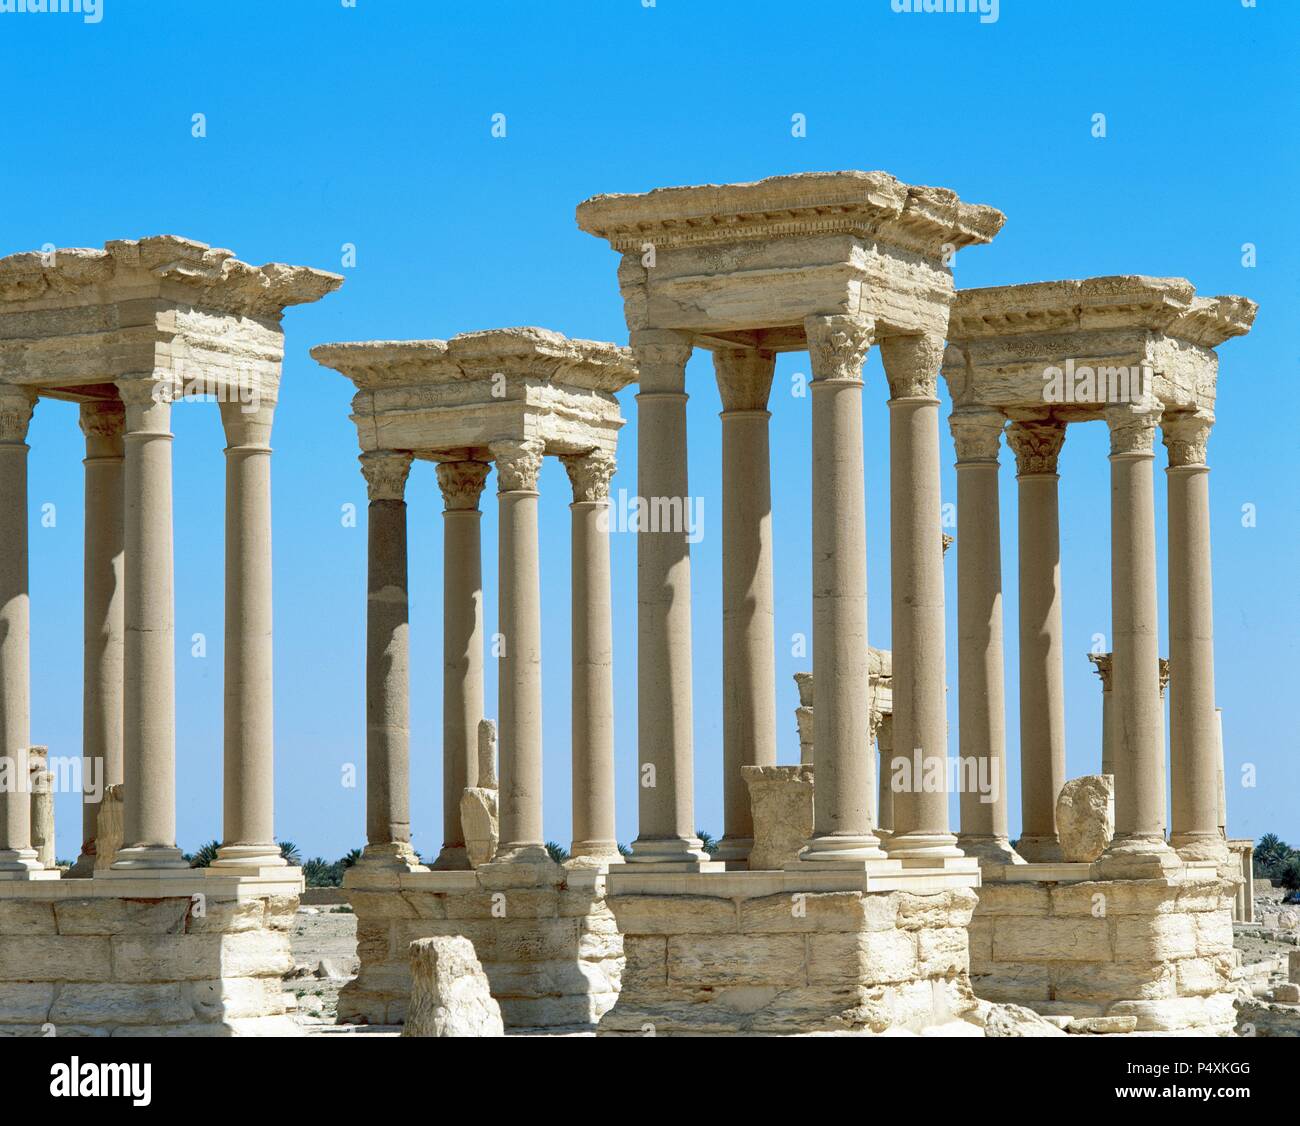 Roman art. Syria. Palmyra. The tetrapylon. Ancient type of monument of cubic shape with a gate on each of the four sides. Stock Photo